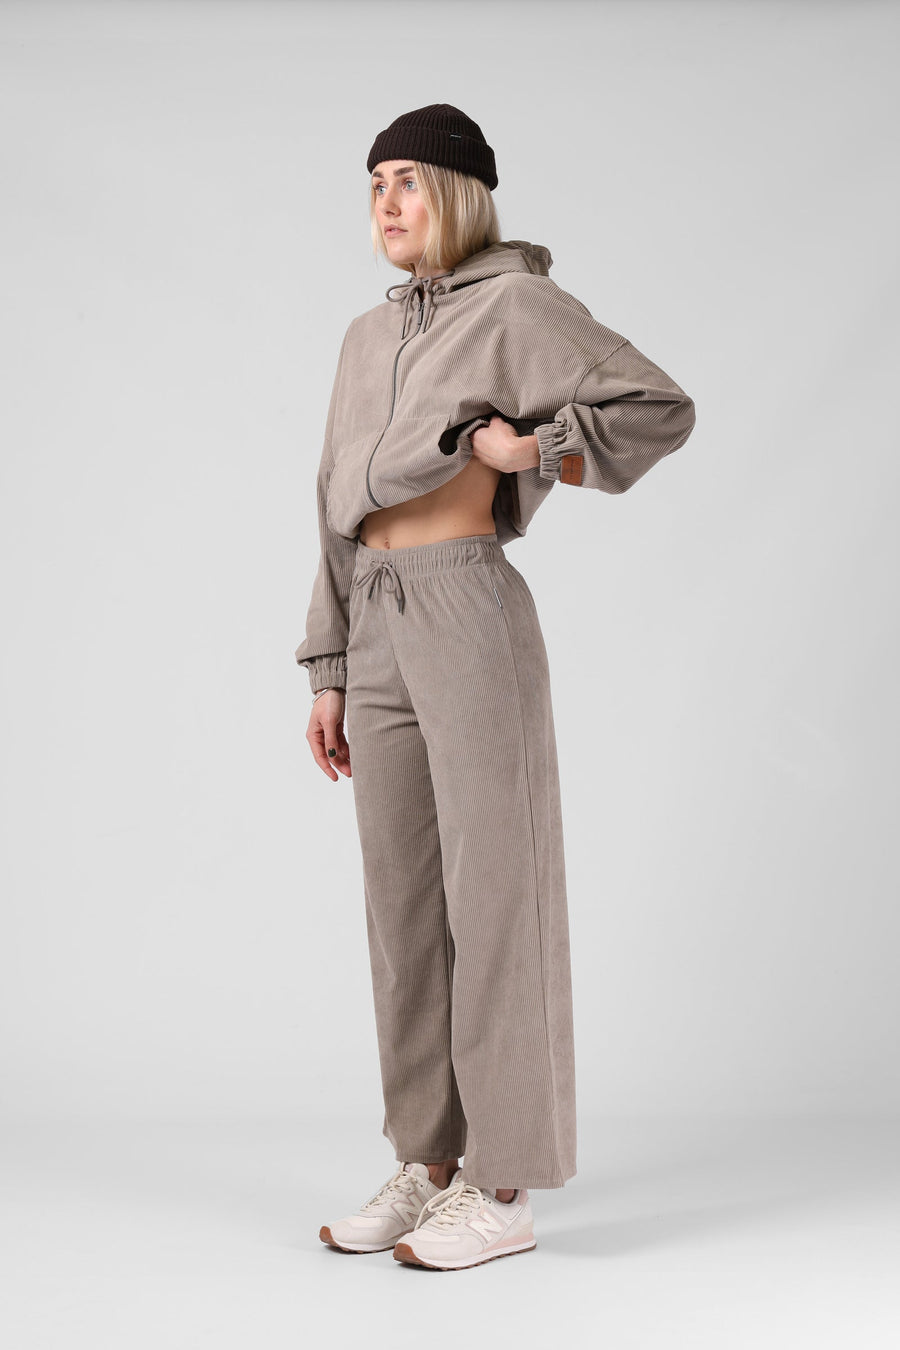 RPM BOWIE PANT - GREY TAUPE - WILDROSE